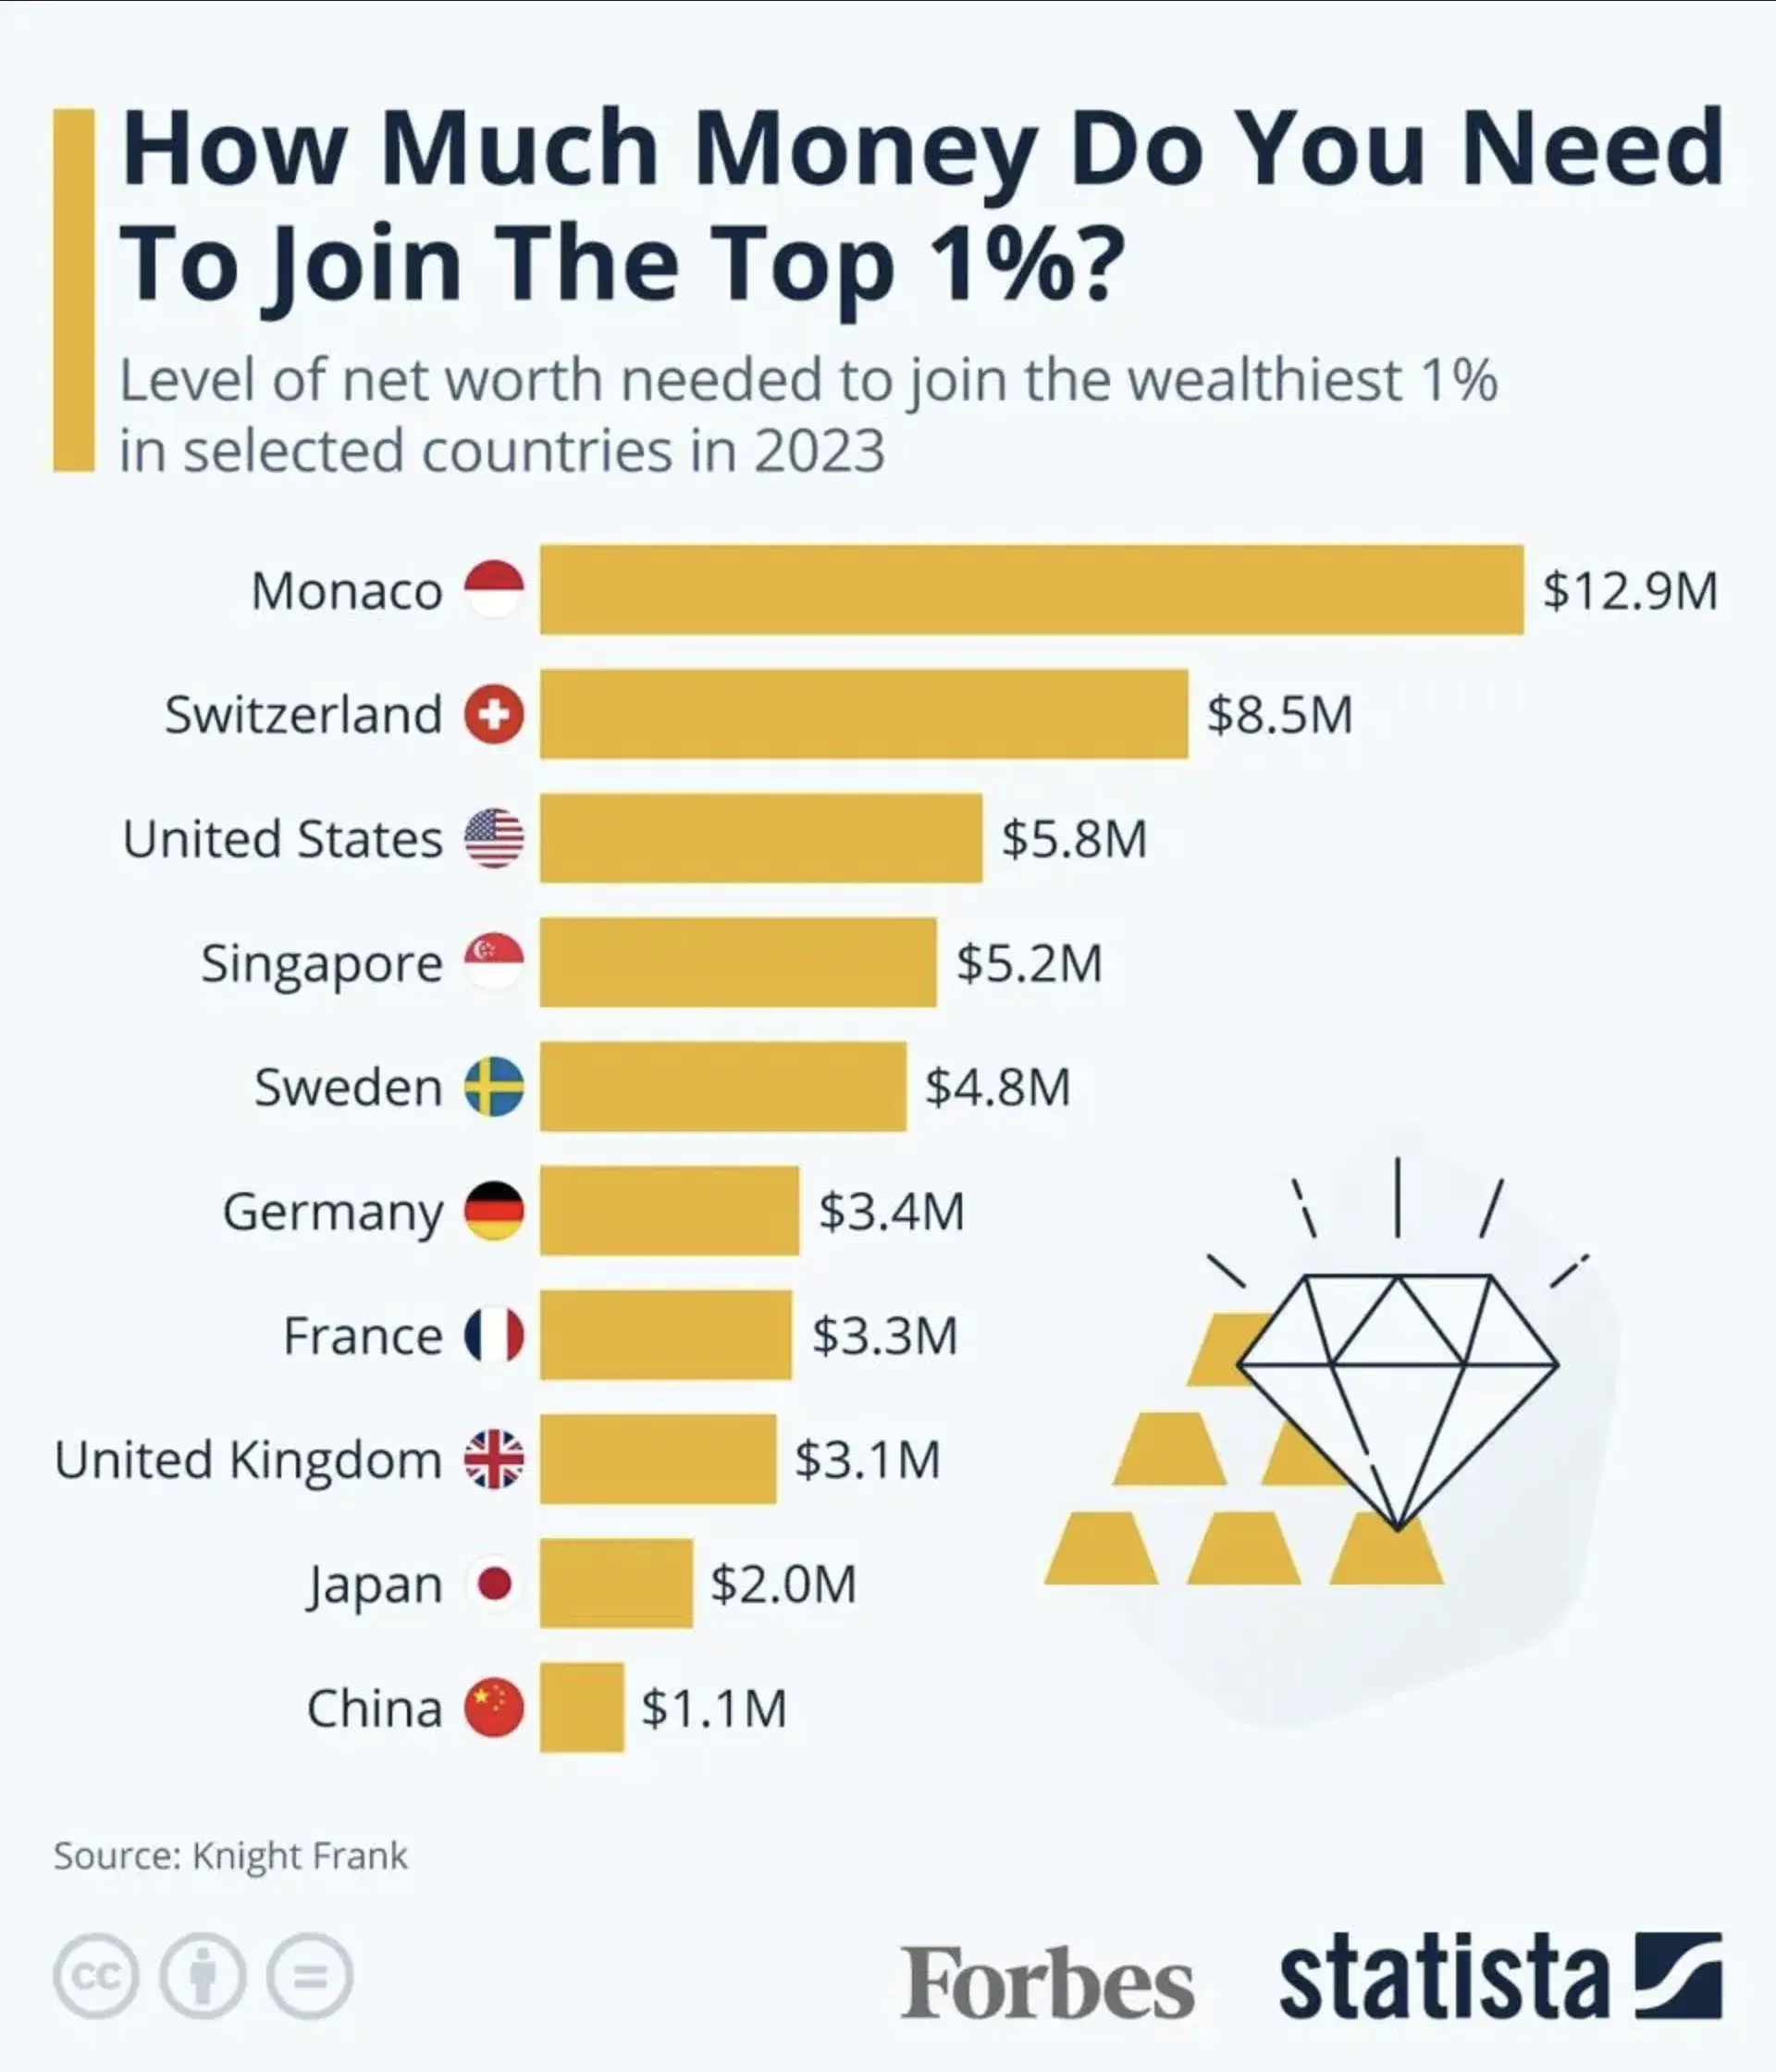 How Much Money Do You Need To Join The Top 1%?